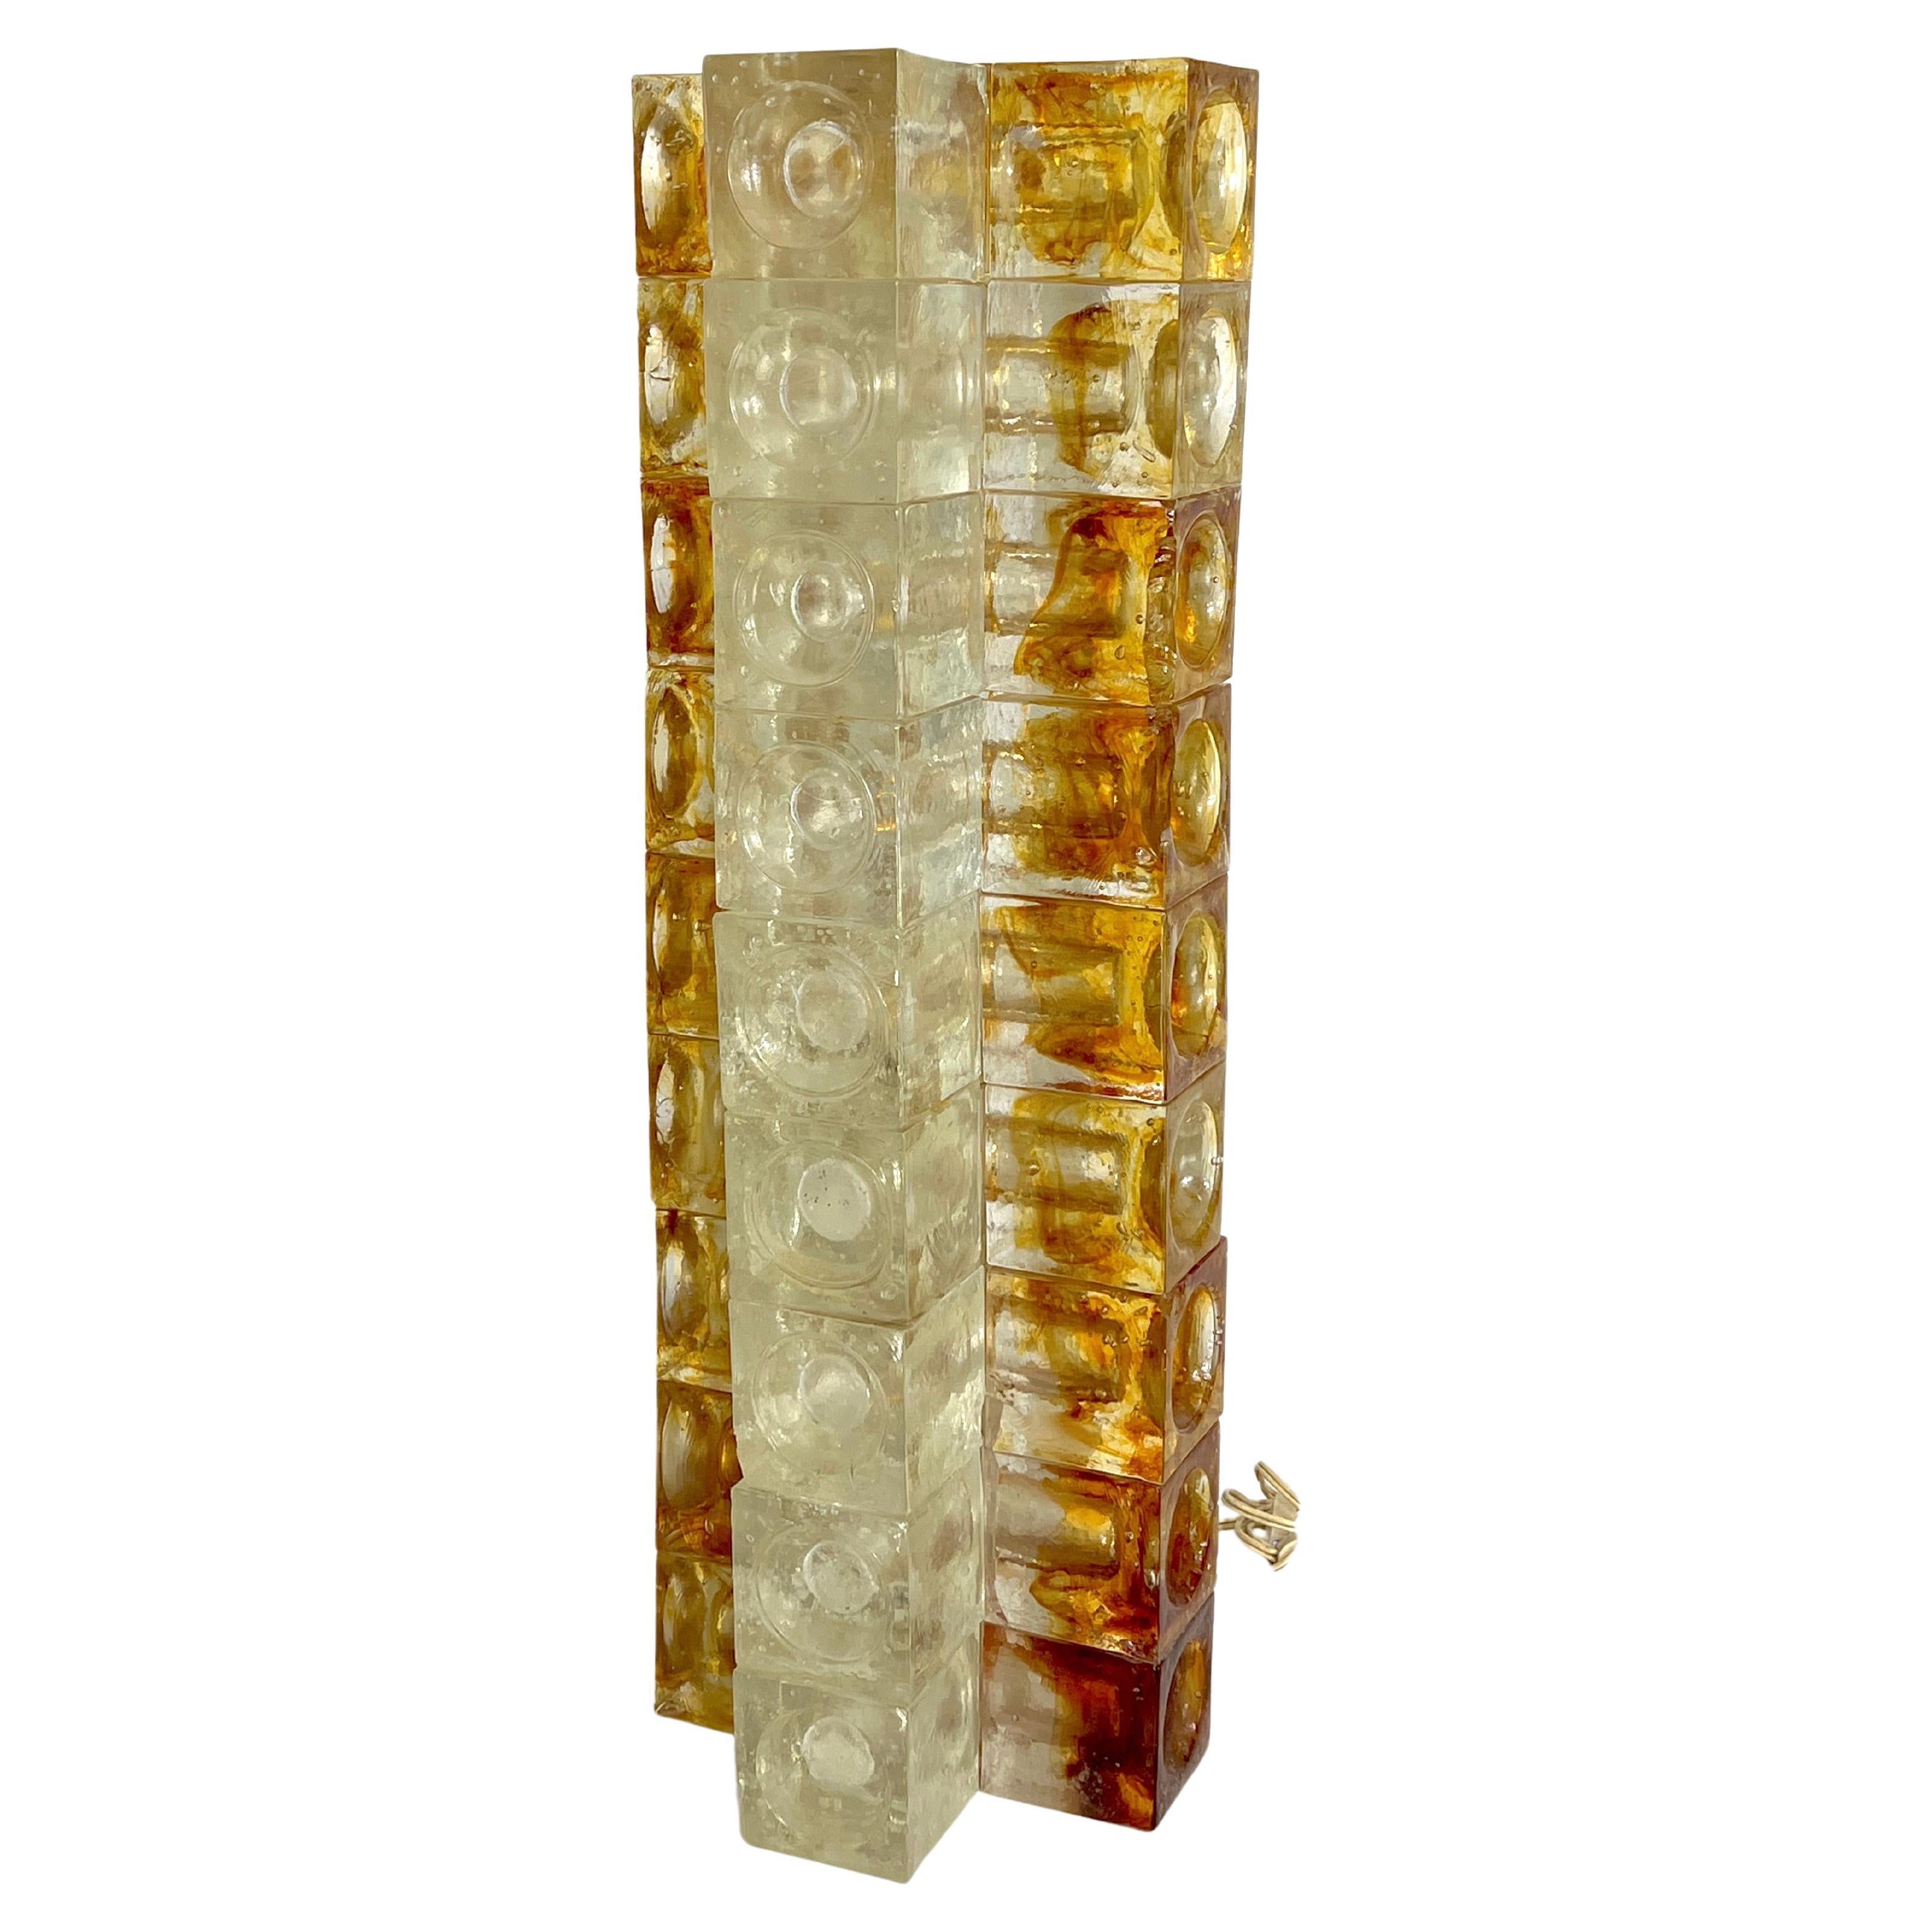 Poliarte, Rare Mid-Century Labeled murano glass floor lamp from 70s